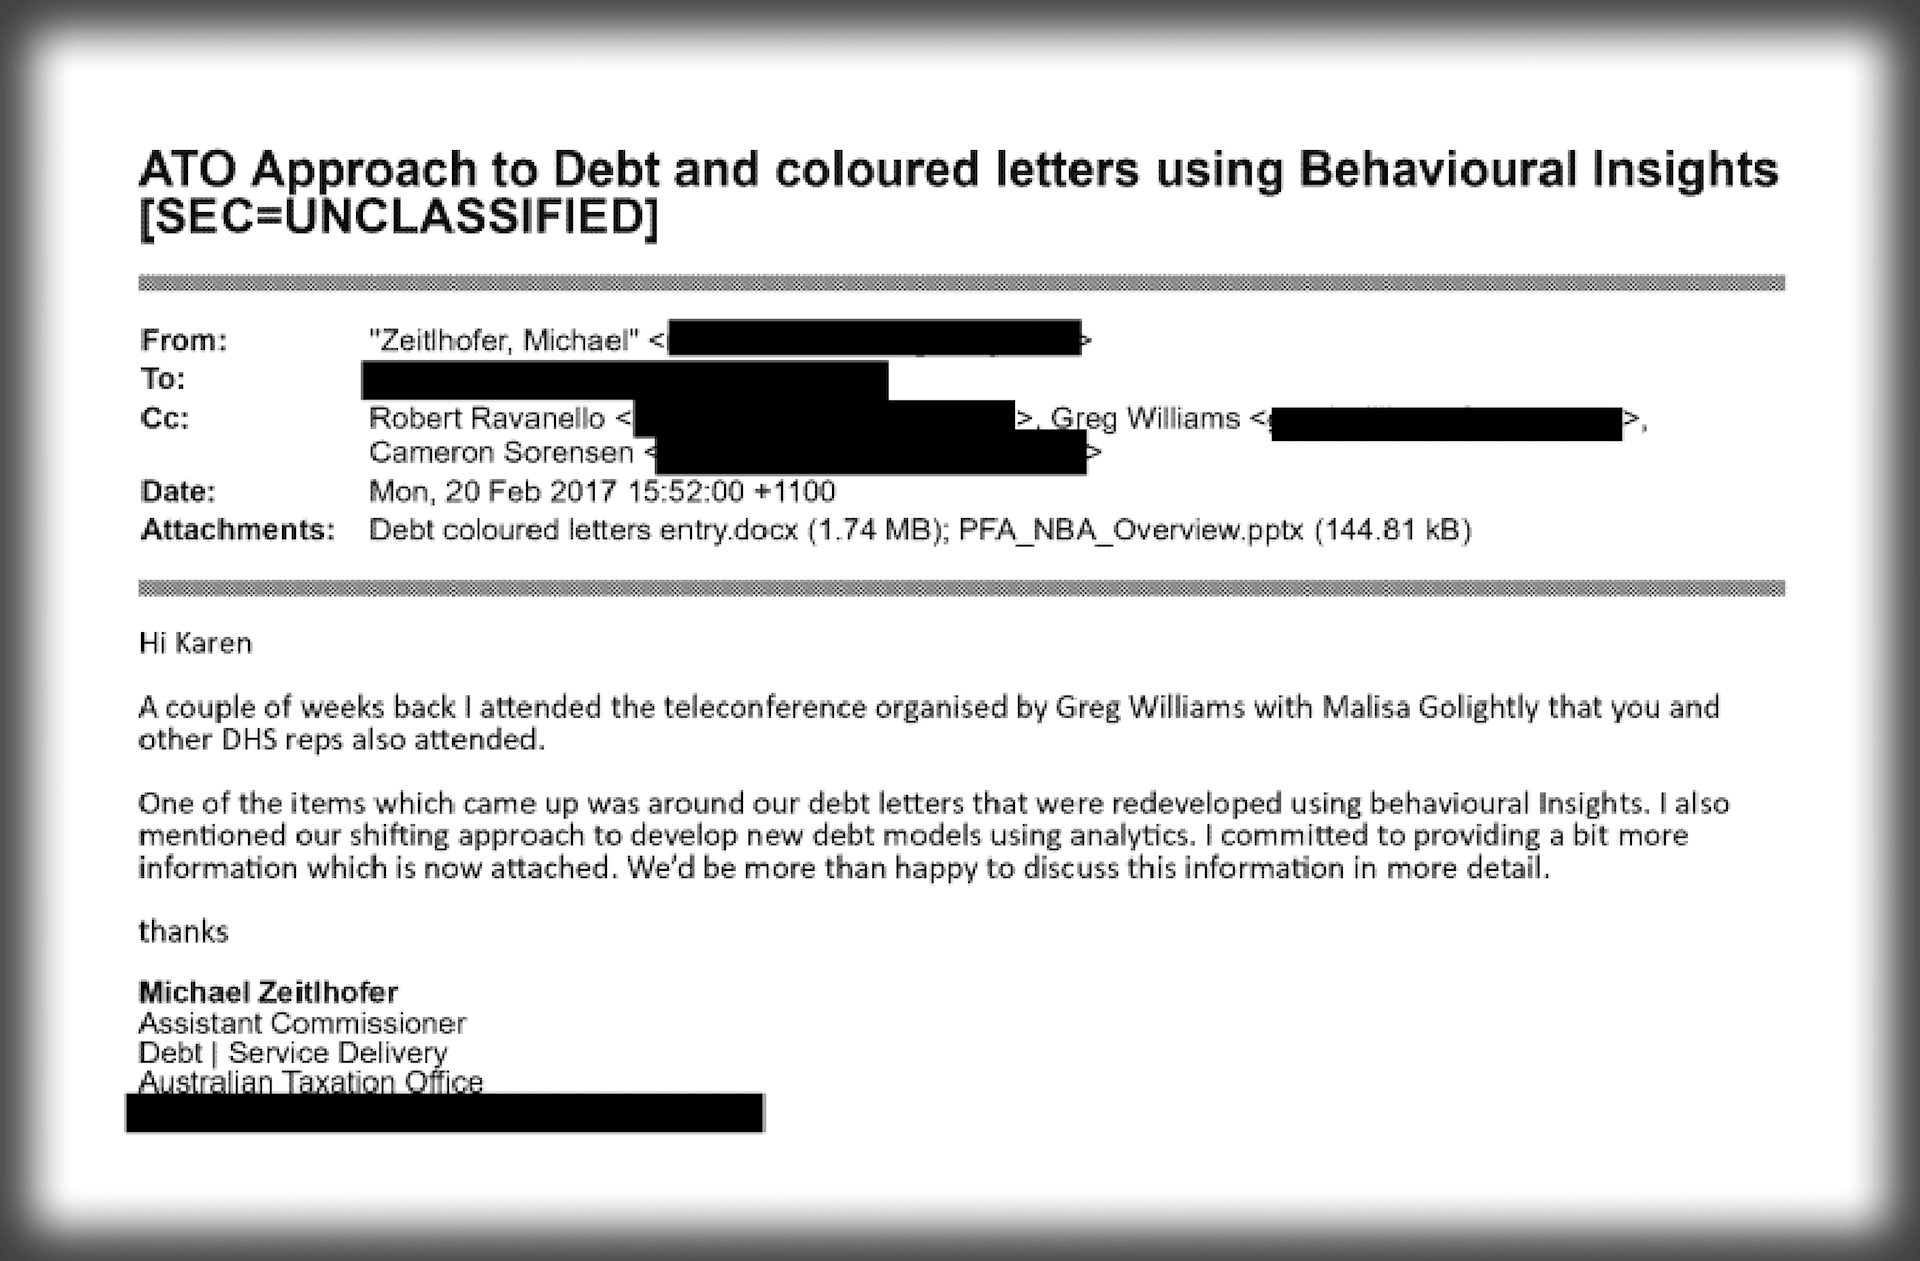 An email about redeveloping debt letters using ‘behavioural insights’.